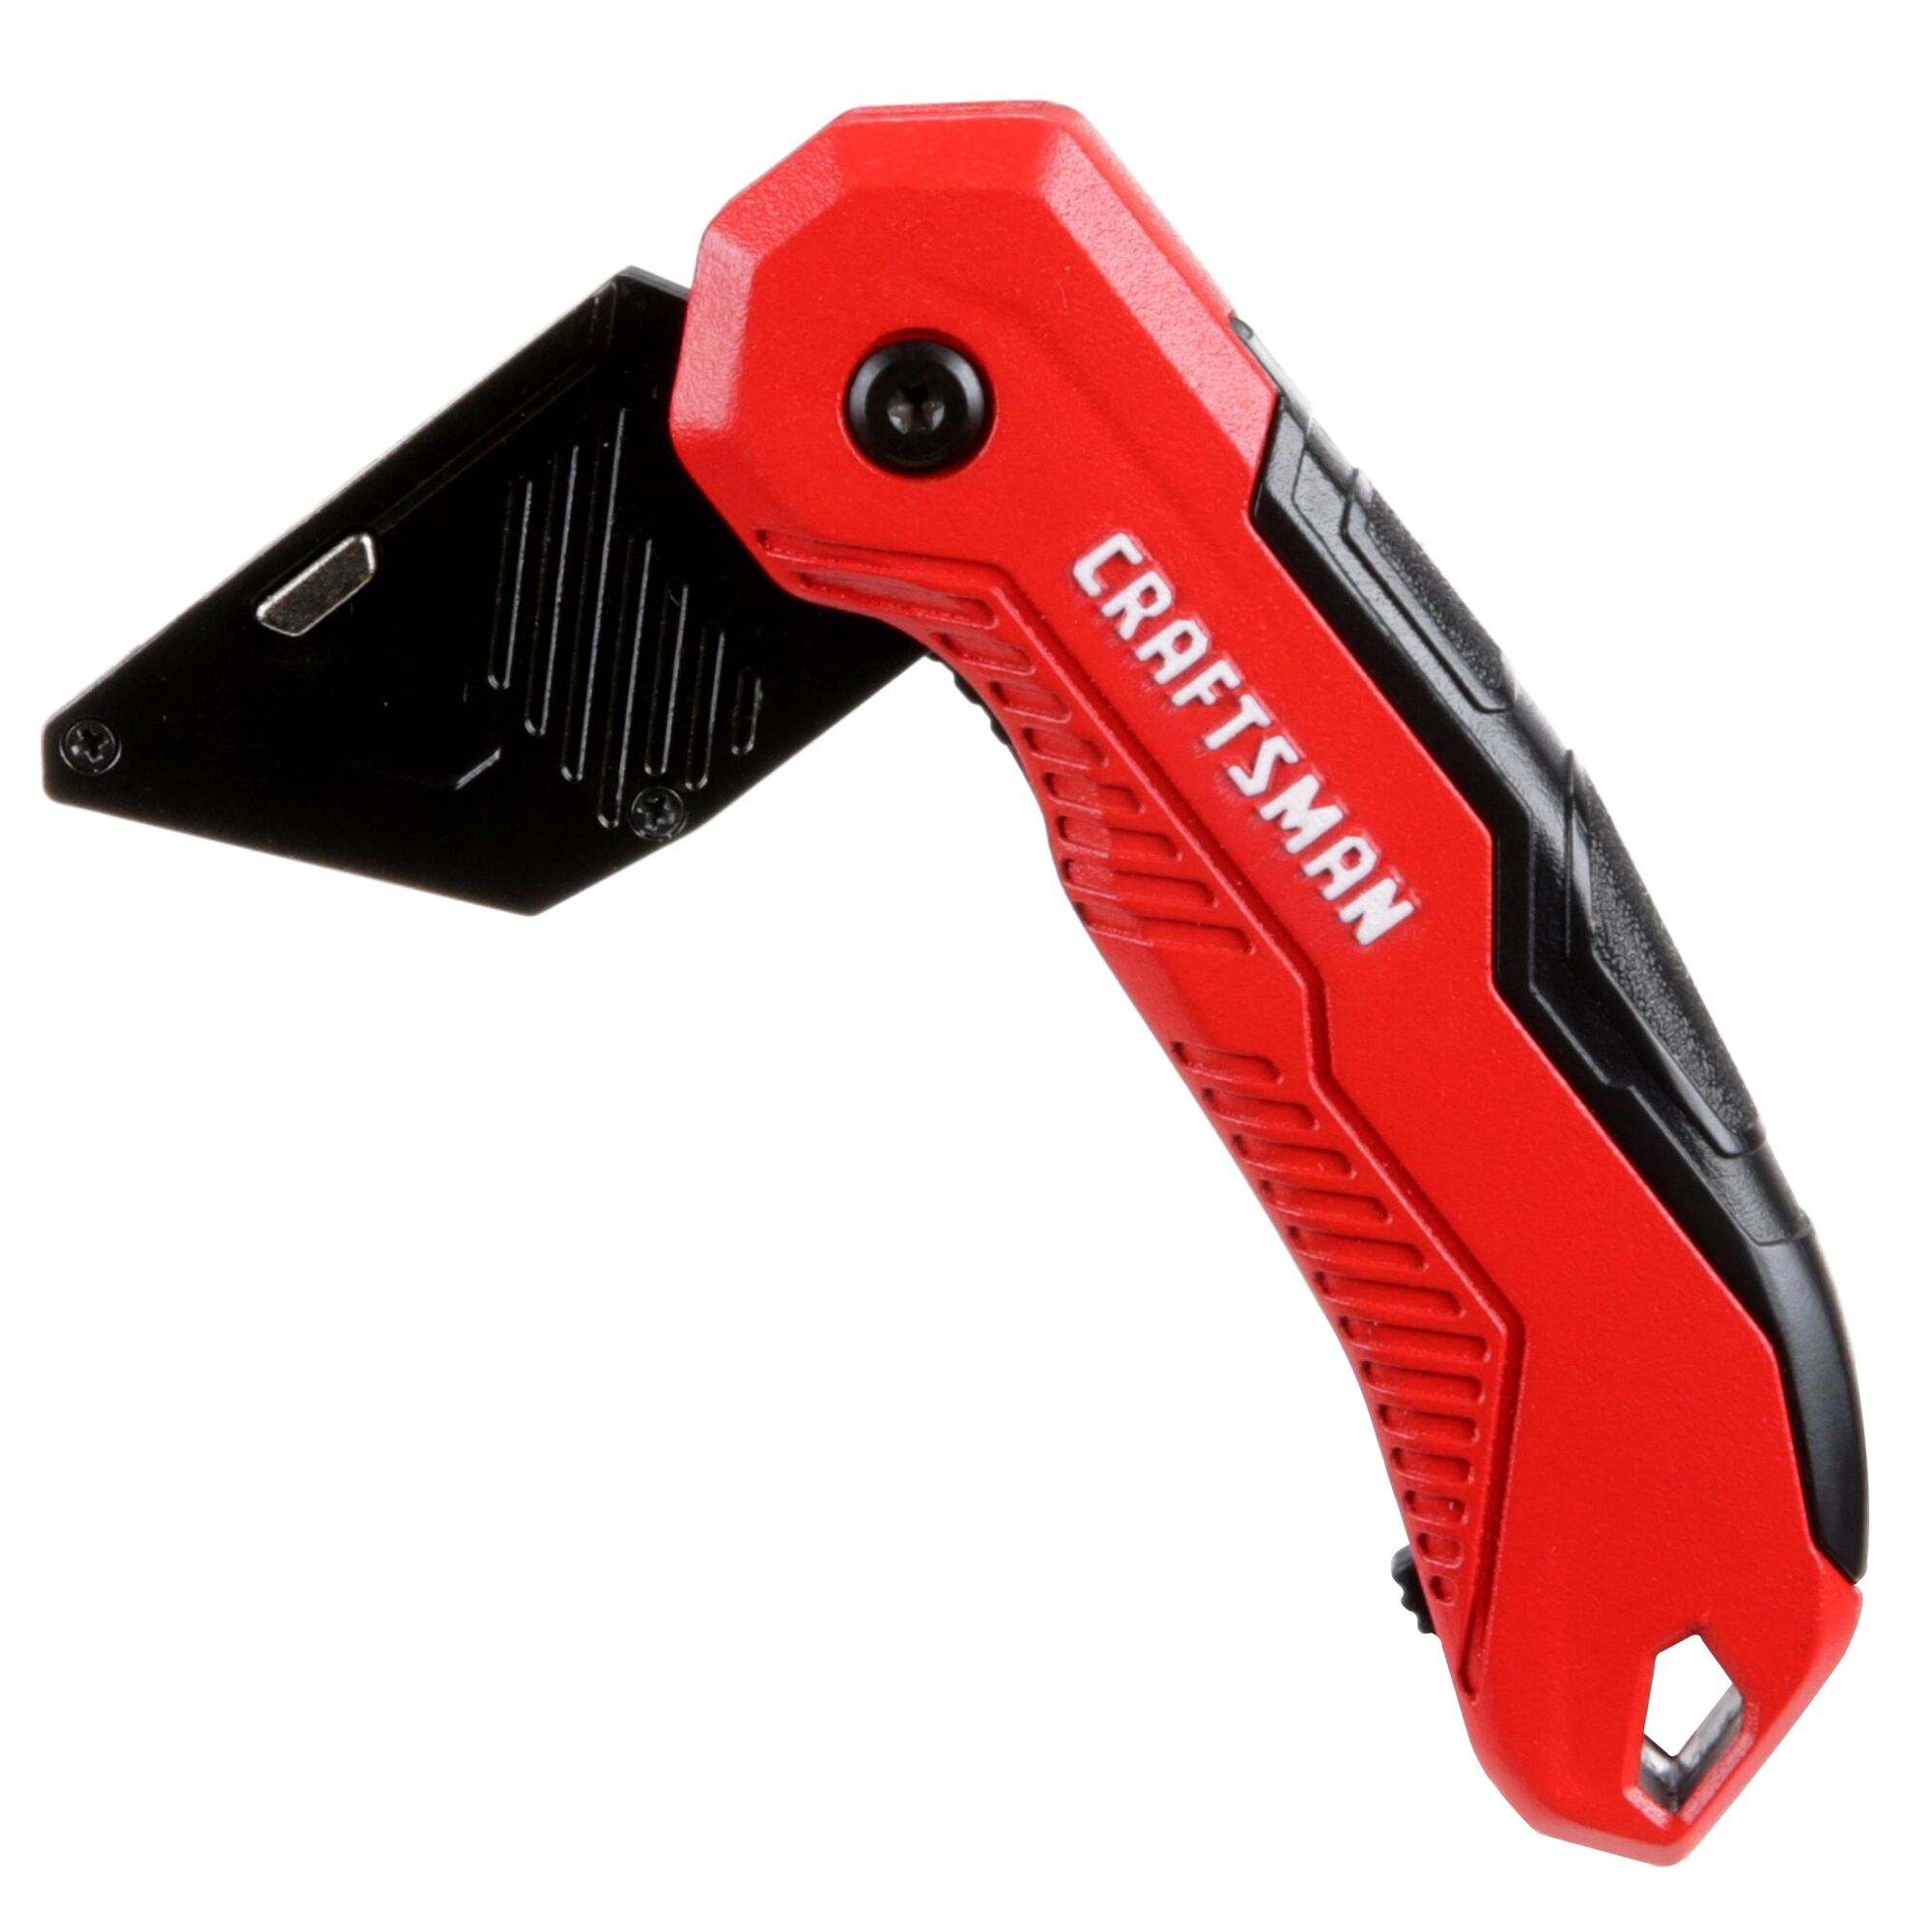 View of CRAFTSMAN Knives & Blades: Knives: Utility highlighting product features